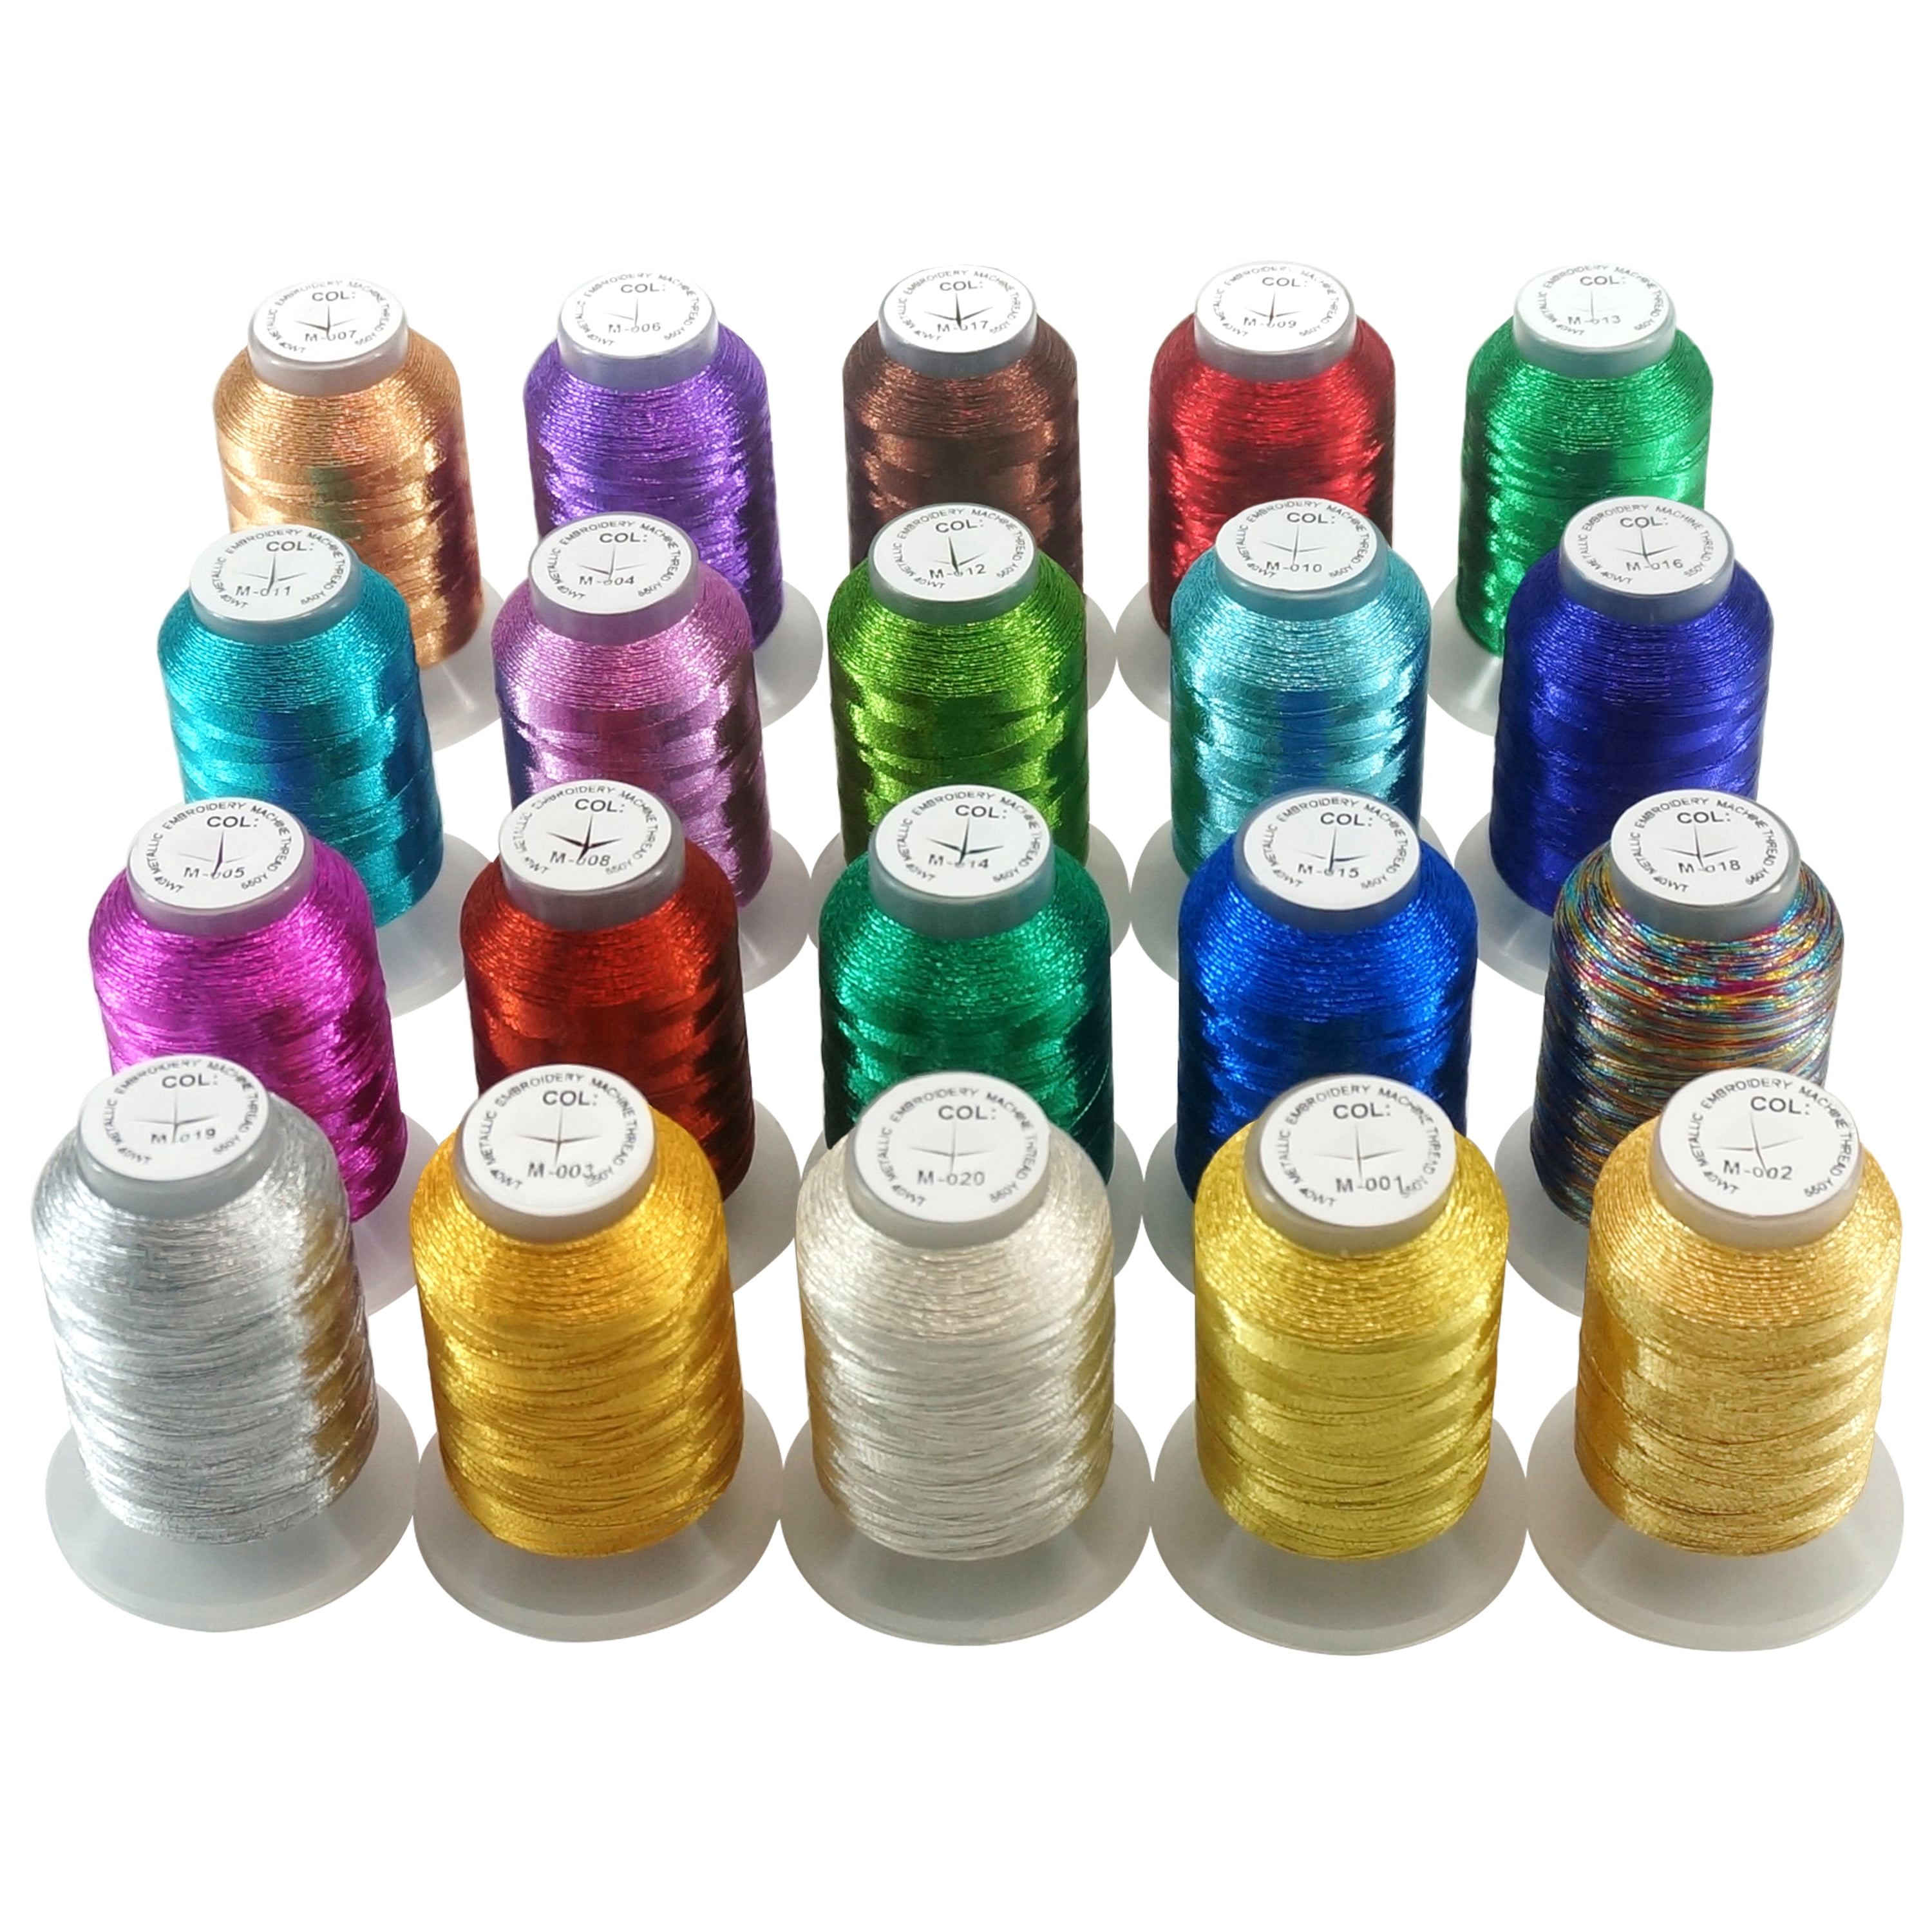 New brothread 20 Assorted Colors Metallic Embroidery Machine Thread Kit 500M (550Y) Each Spool for Computerized Embroidery